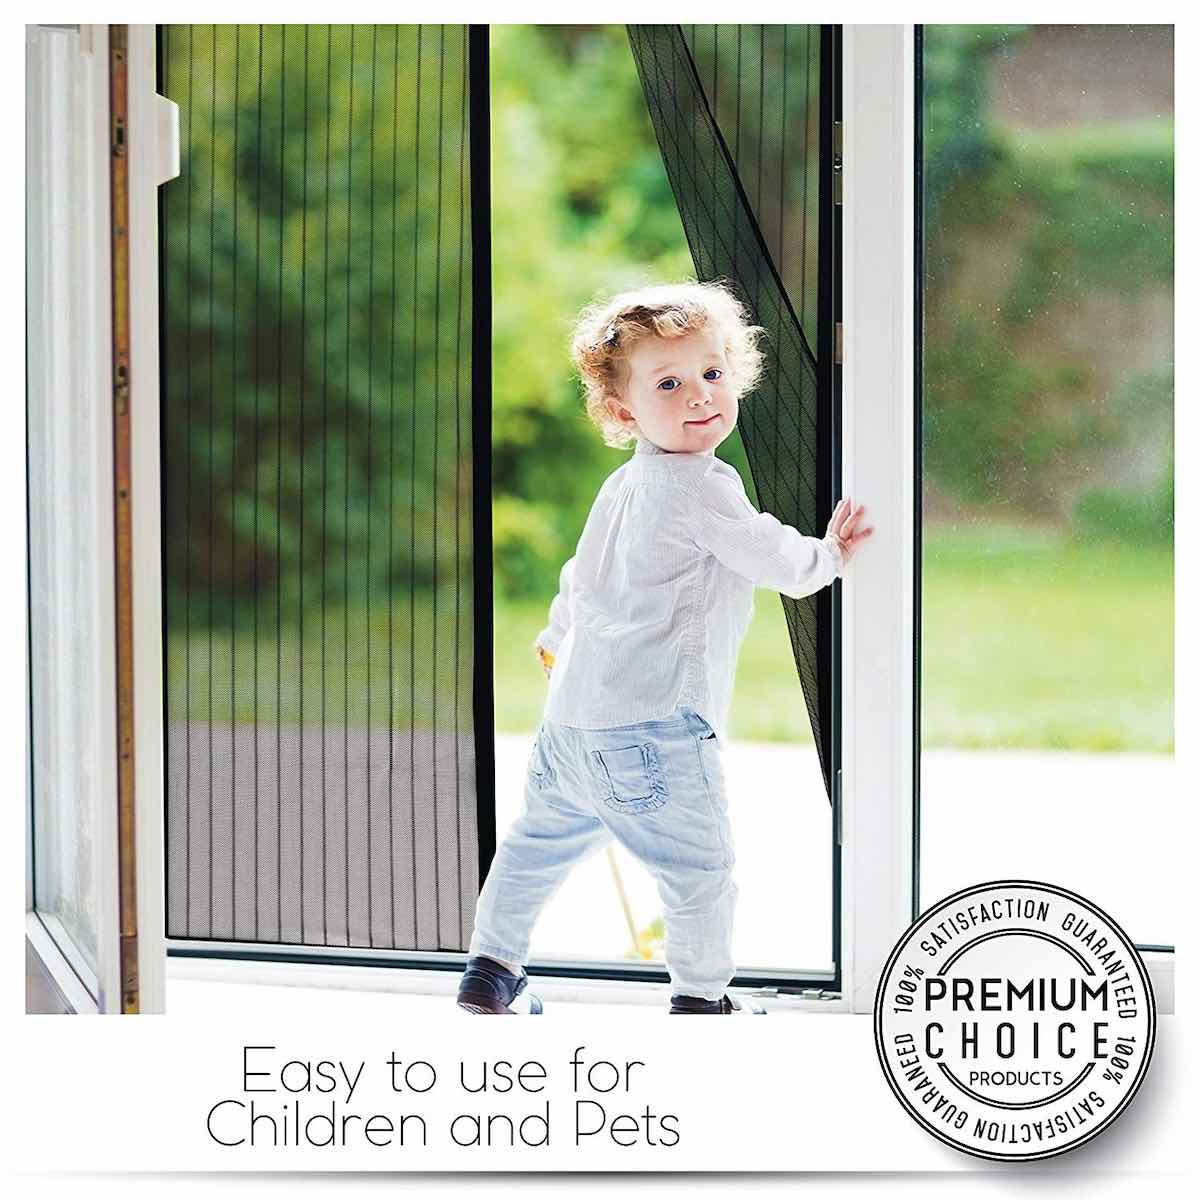 90x210CM Top-to-Bottom Seal No Mosquitos Fits Door Up to 34 x 82 Magnetic Screen Door Magnetic Fly Insect Screen Door Mosquito Net Automatically Shut Hands Free Keep Bugs Out Let Fresh Air in